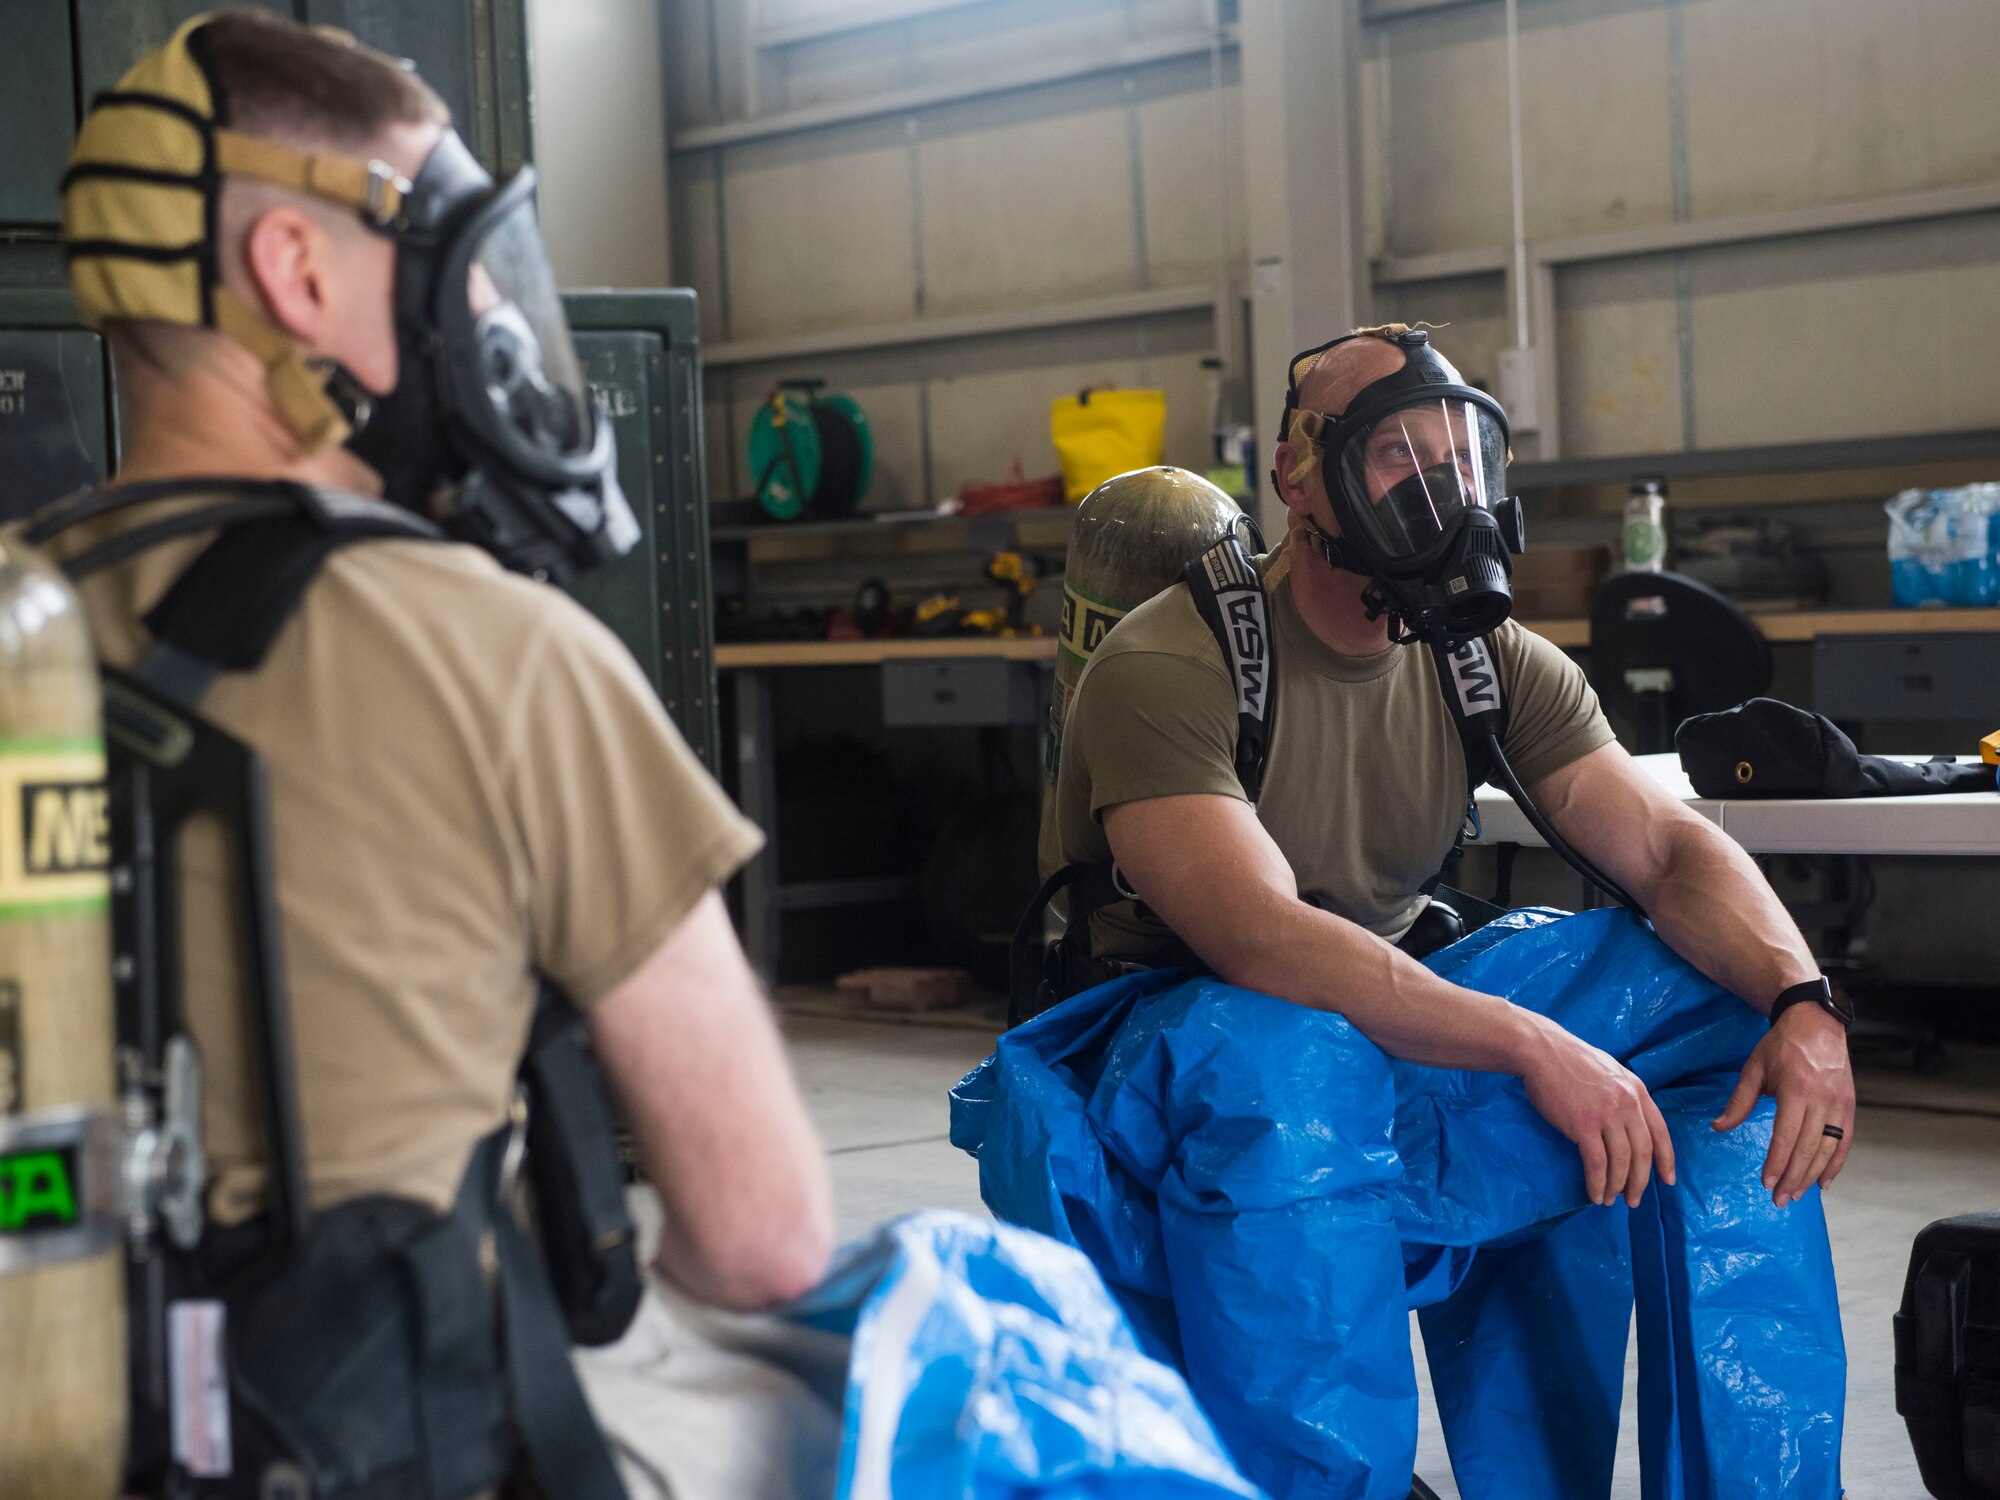 Two men wearing hazmat suits sitting on chairs.